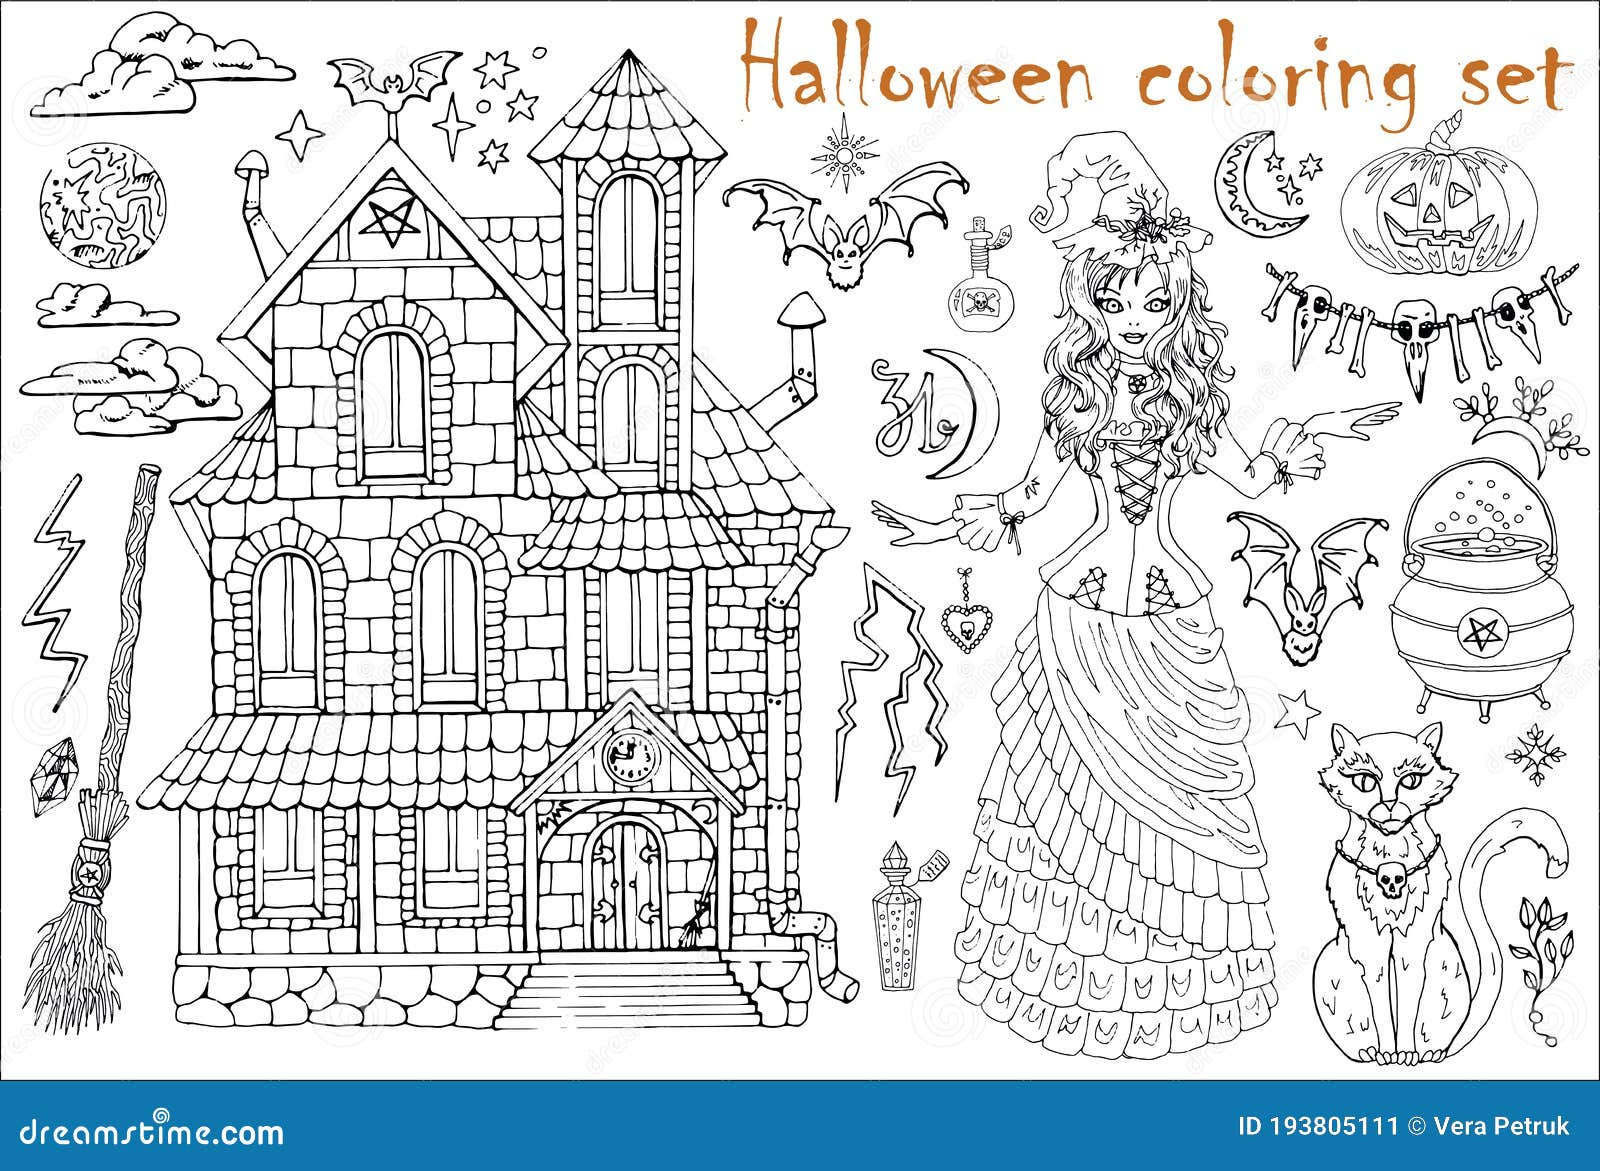 https://thumbs.dreamstime.com/z/halloween-coloring-set-beautiful-witch-girl-costume-house-cat-pot-scary-objects-hand-drawn-vector-illustration-193805111.jpg